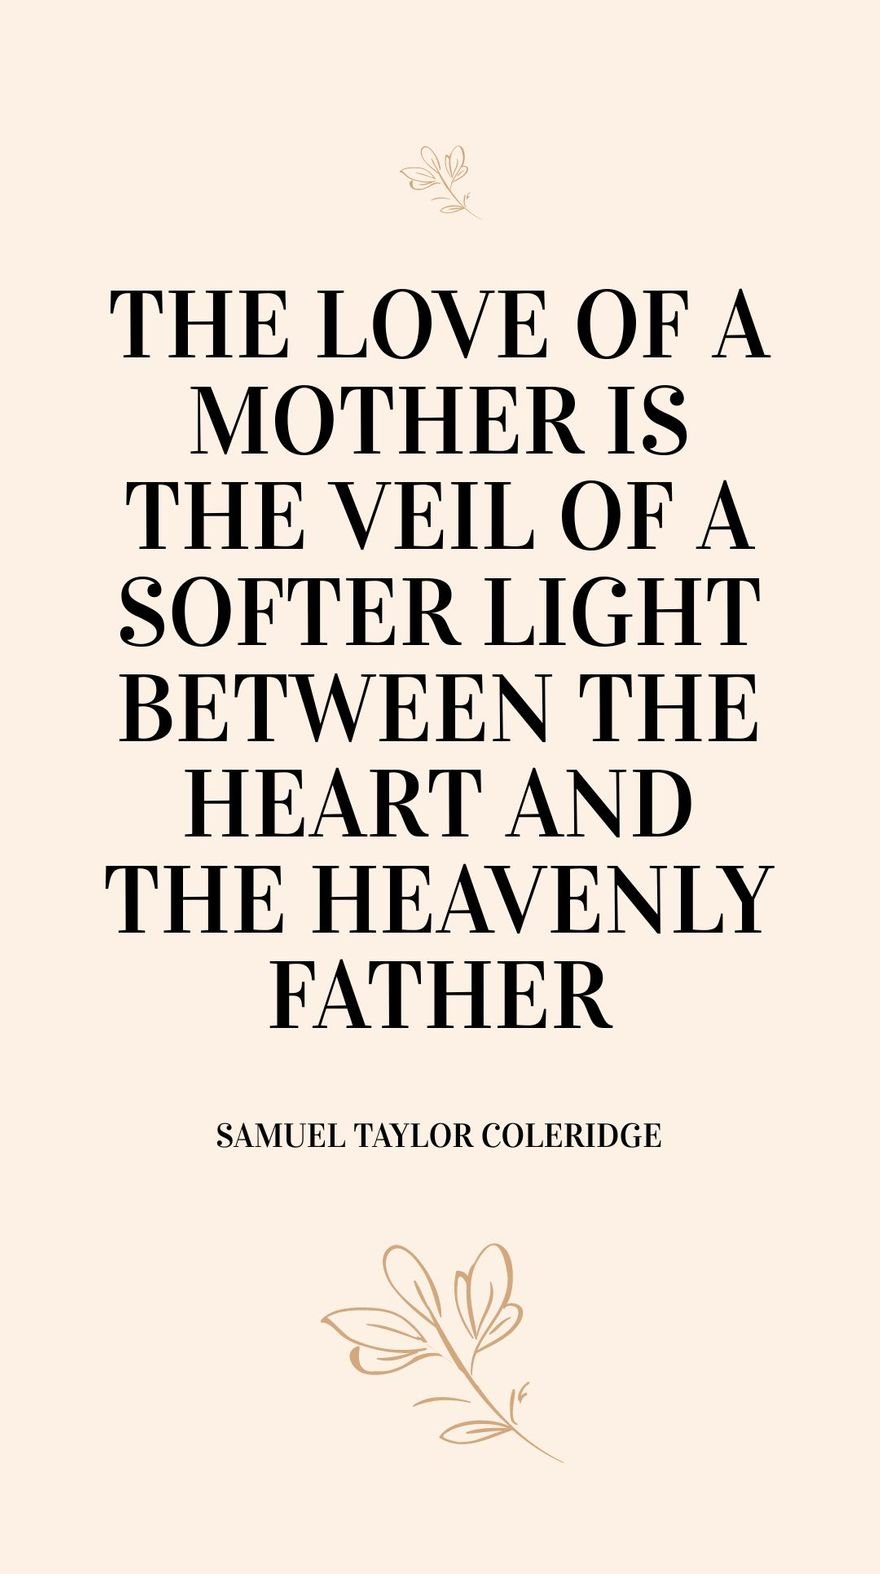 Samuel Taylor Coleridge - The love of a mother is the veil of a softer light between the heart and the heavenly Father. 